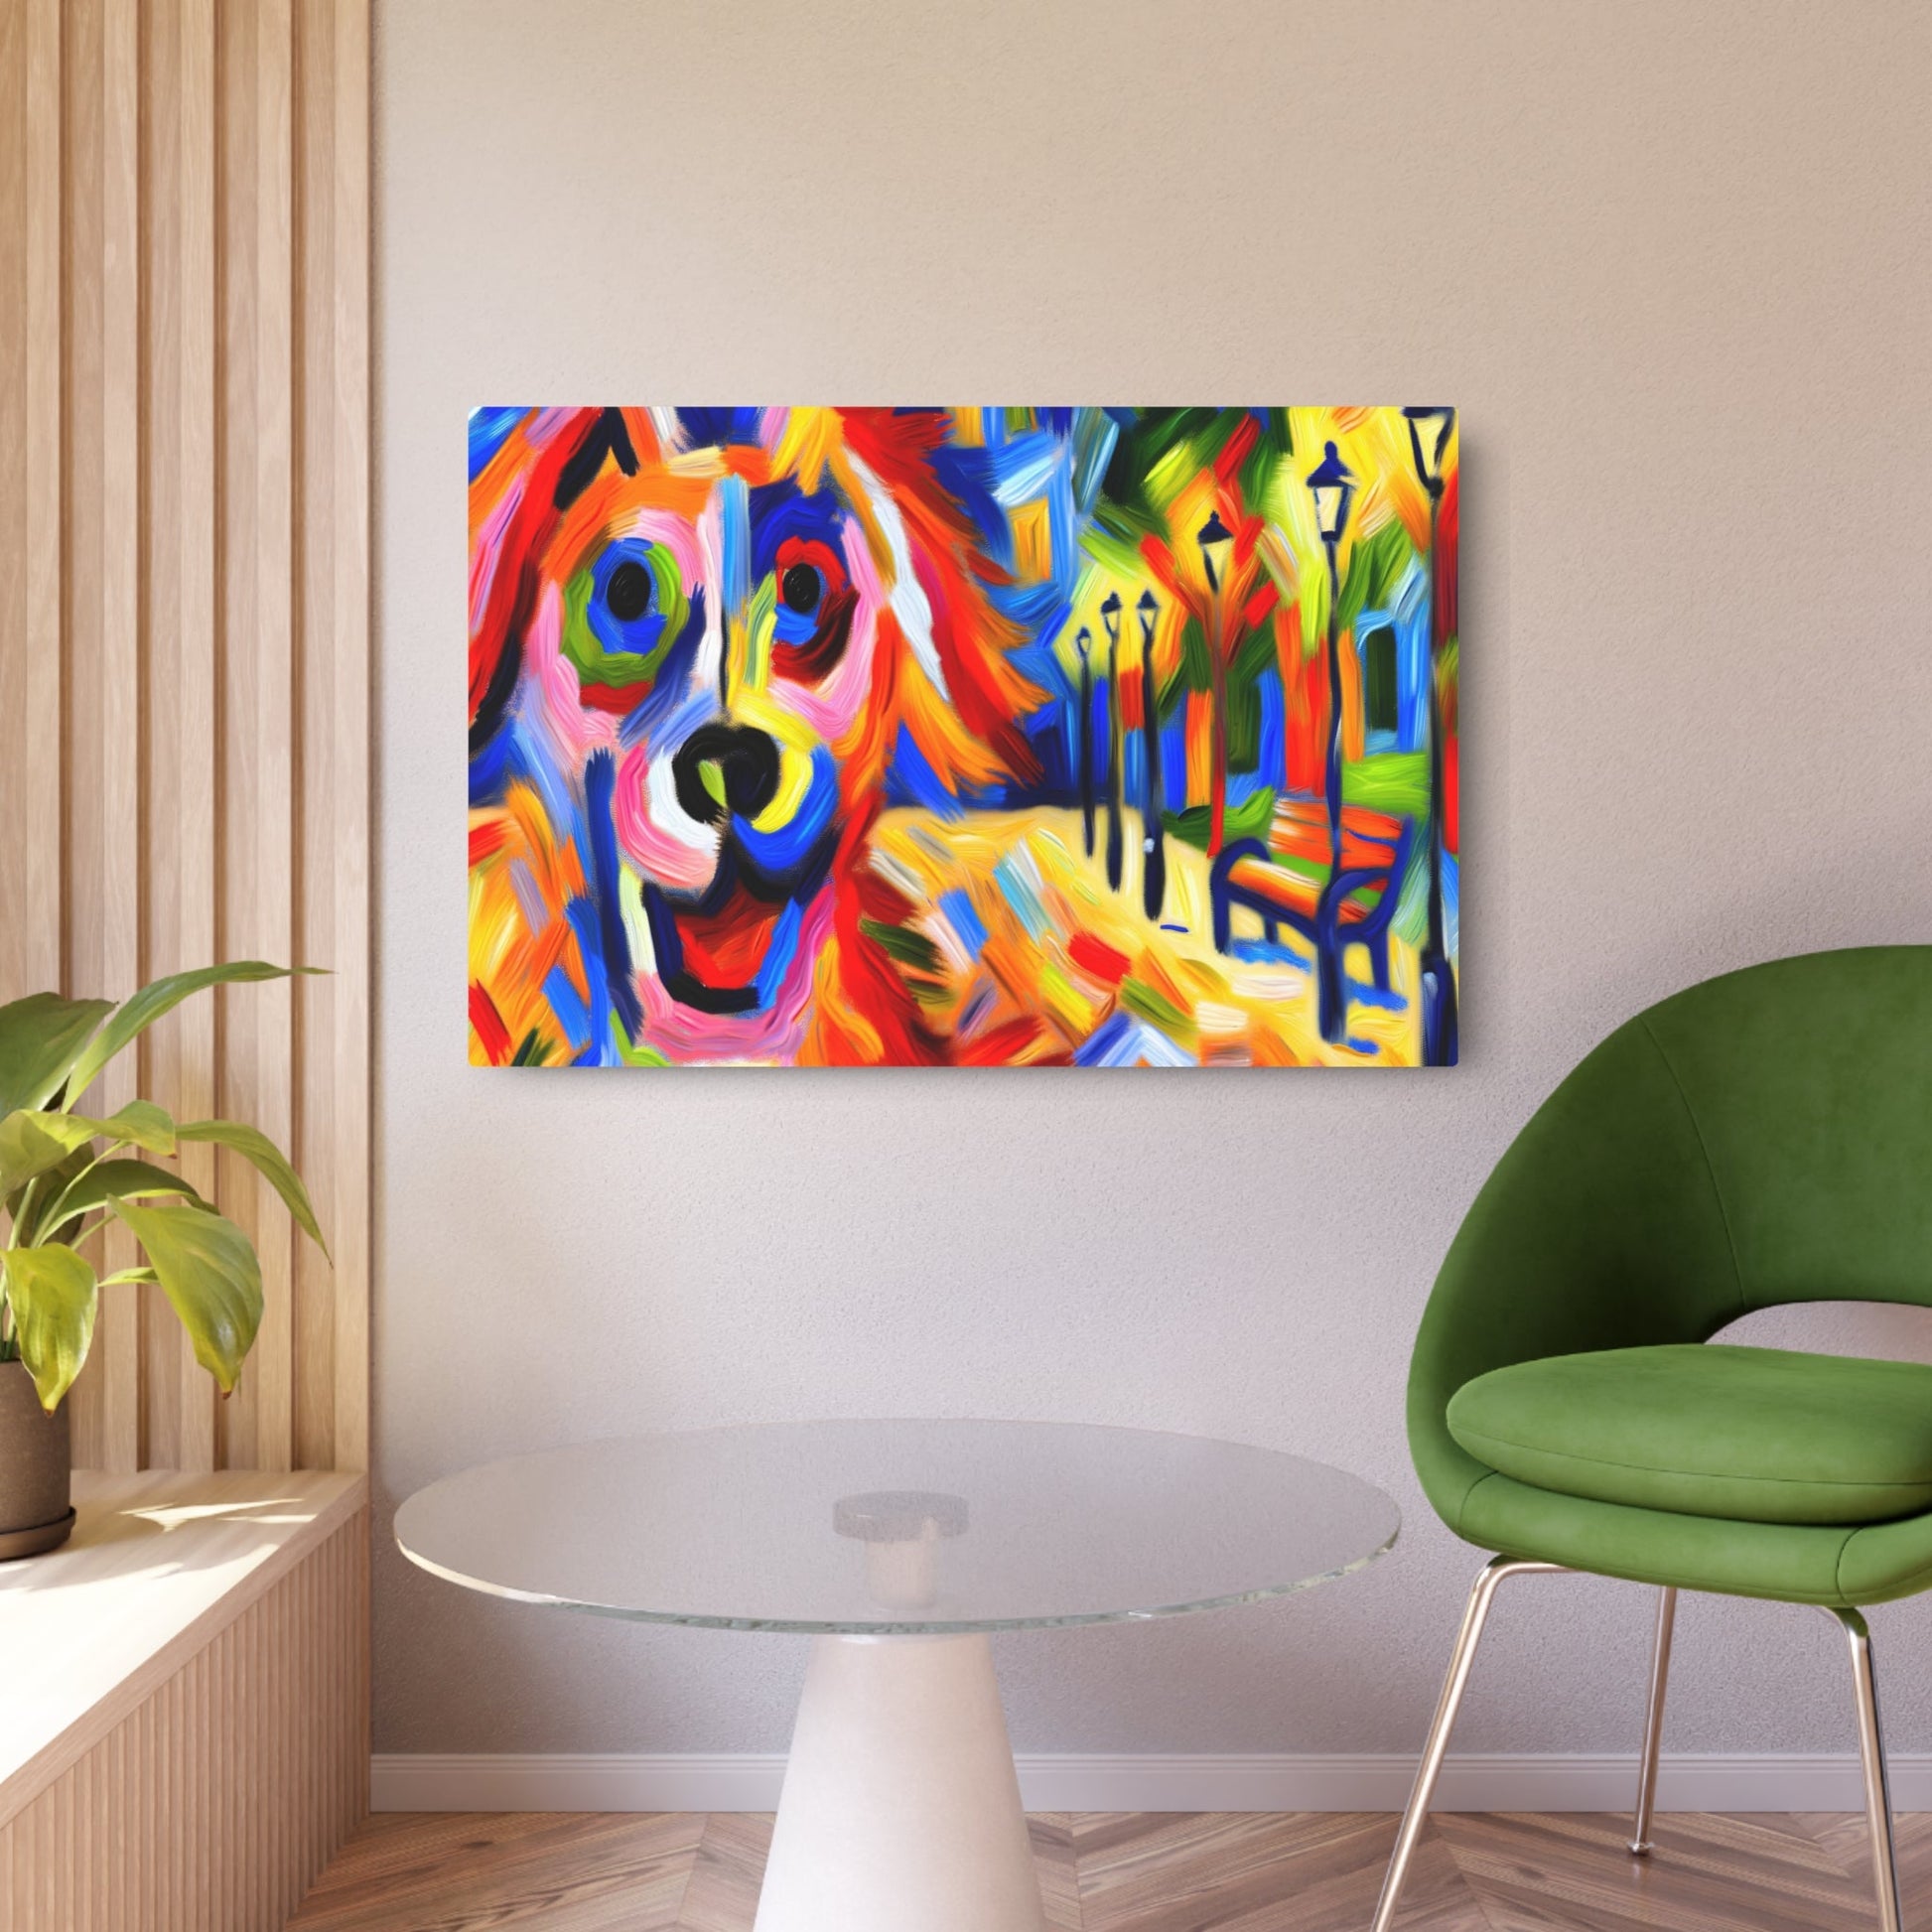 Metal Poster Art | "Vibrant Expressionism Style Oil Painting of a Playful Dog in Bold Colors - Western Art Styles Collection" - Metal Poster Art 36″ x 24″ (Horizontal) 0.12''